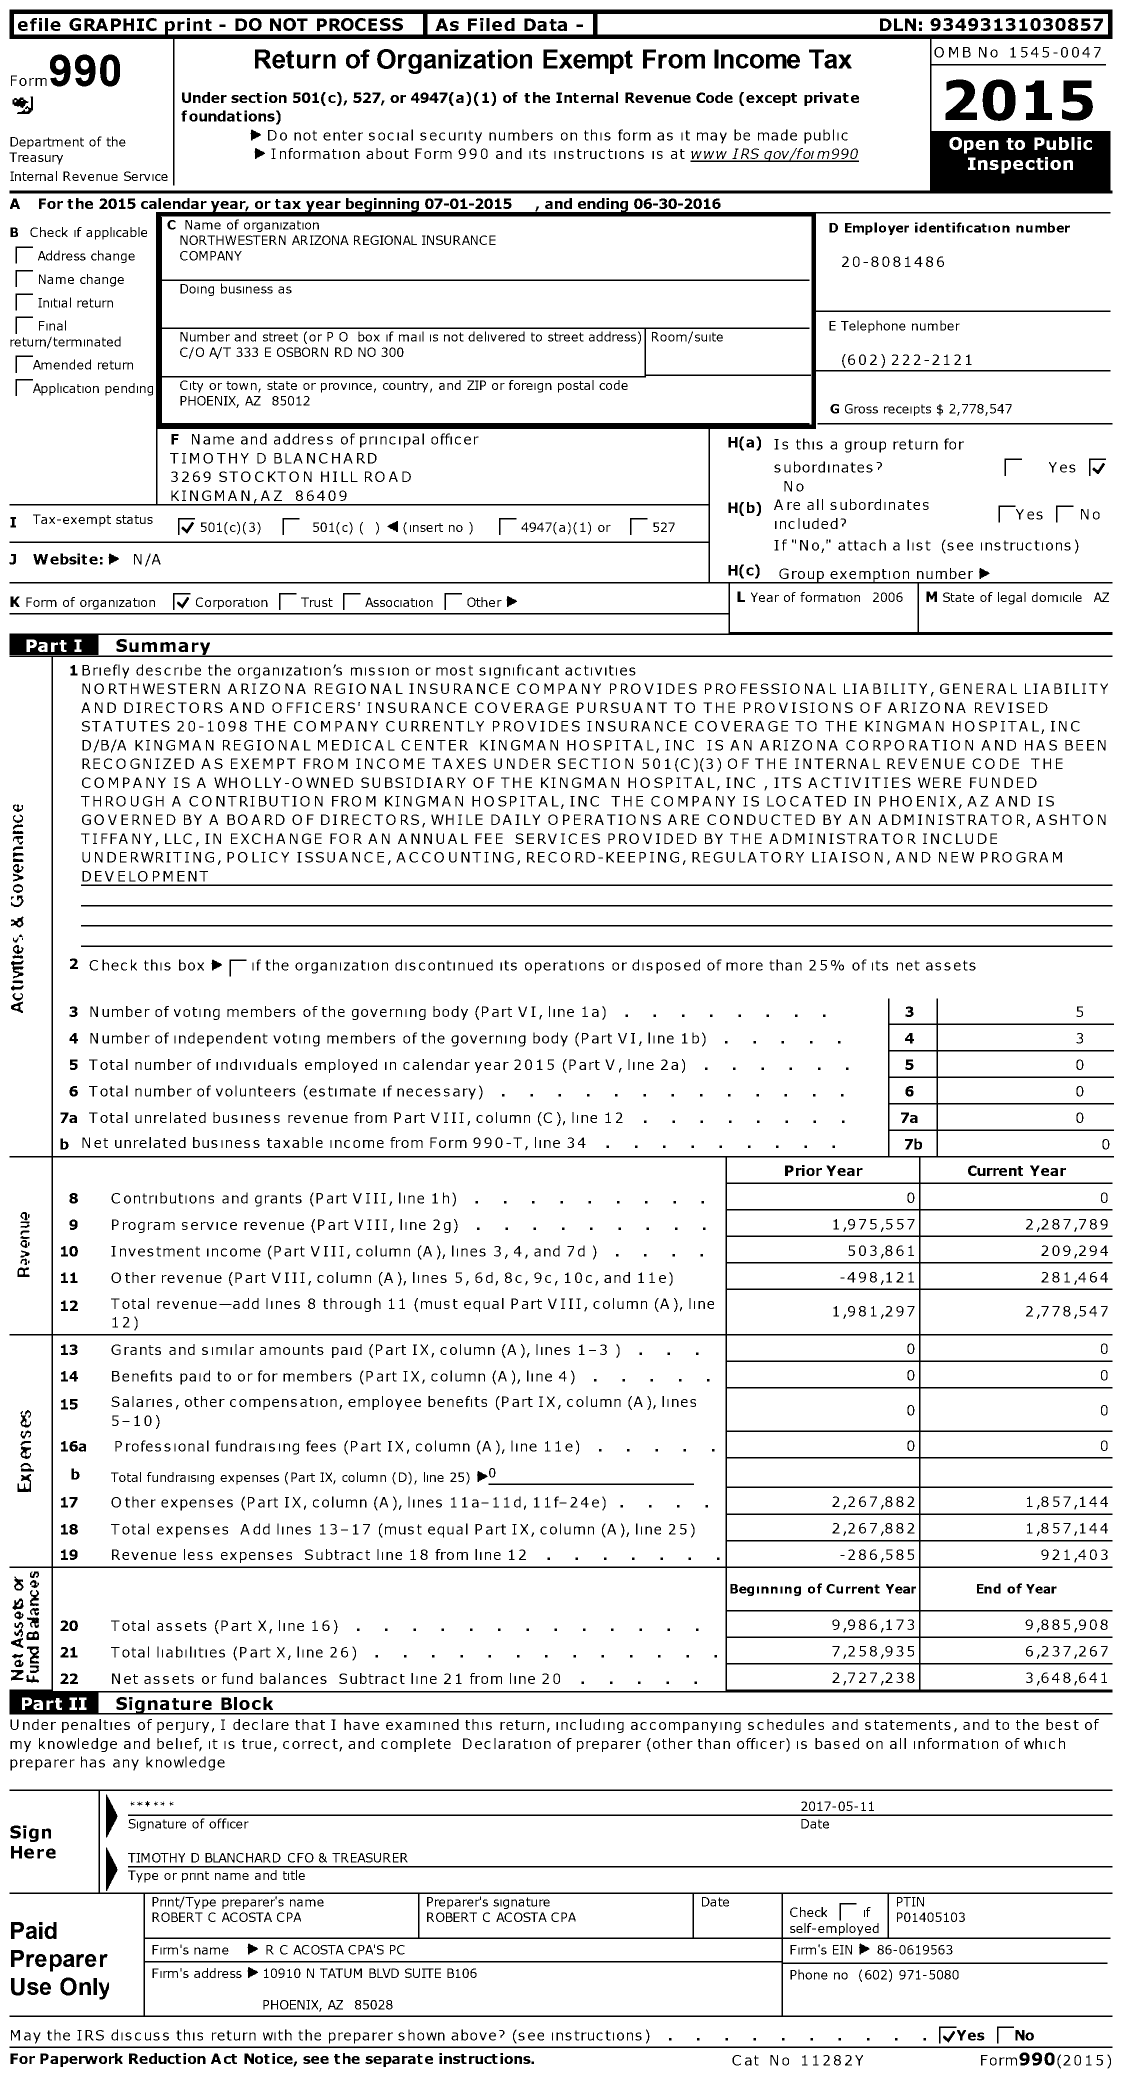 Image of first page of 2015 Form 990 for Northwestern Arizona Regional Insurance Company